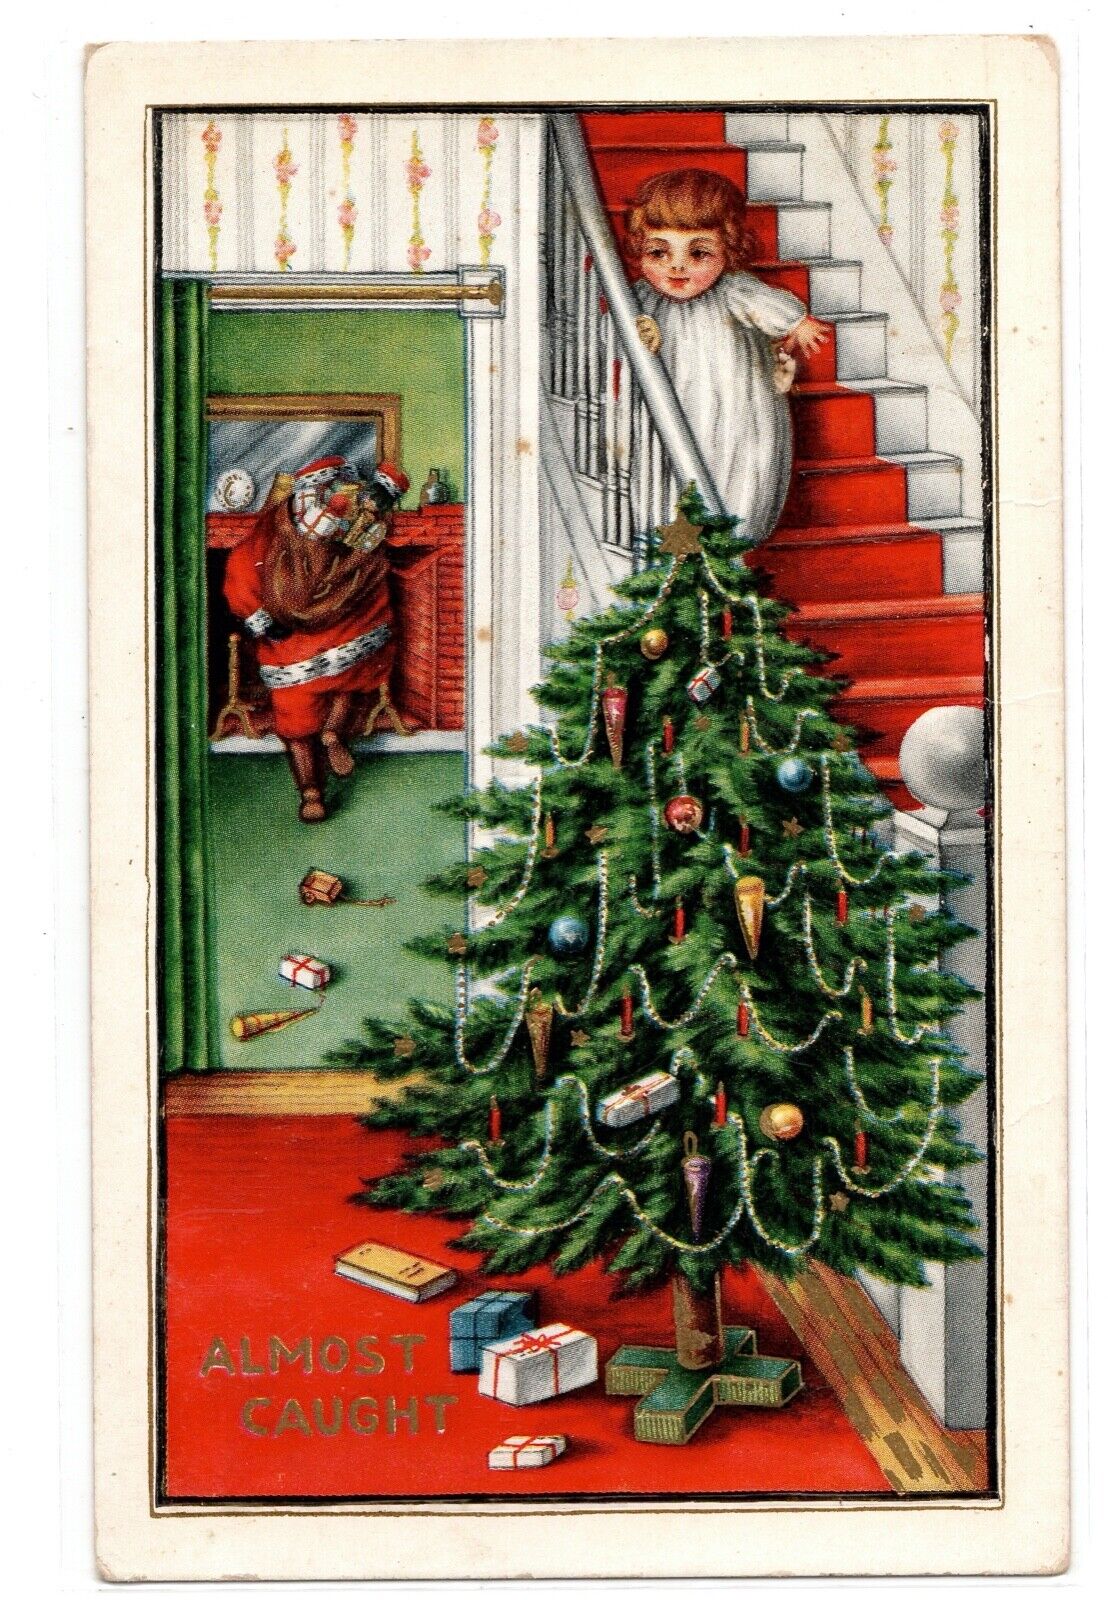 Santa Claus Red Suit Climbing Up The Chimney Tree Toys Child On Stairs 1915 S14